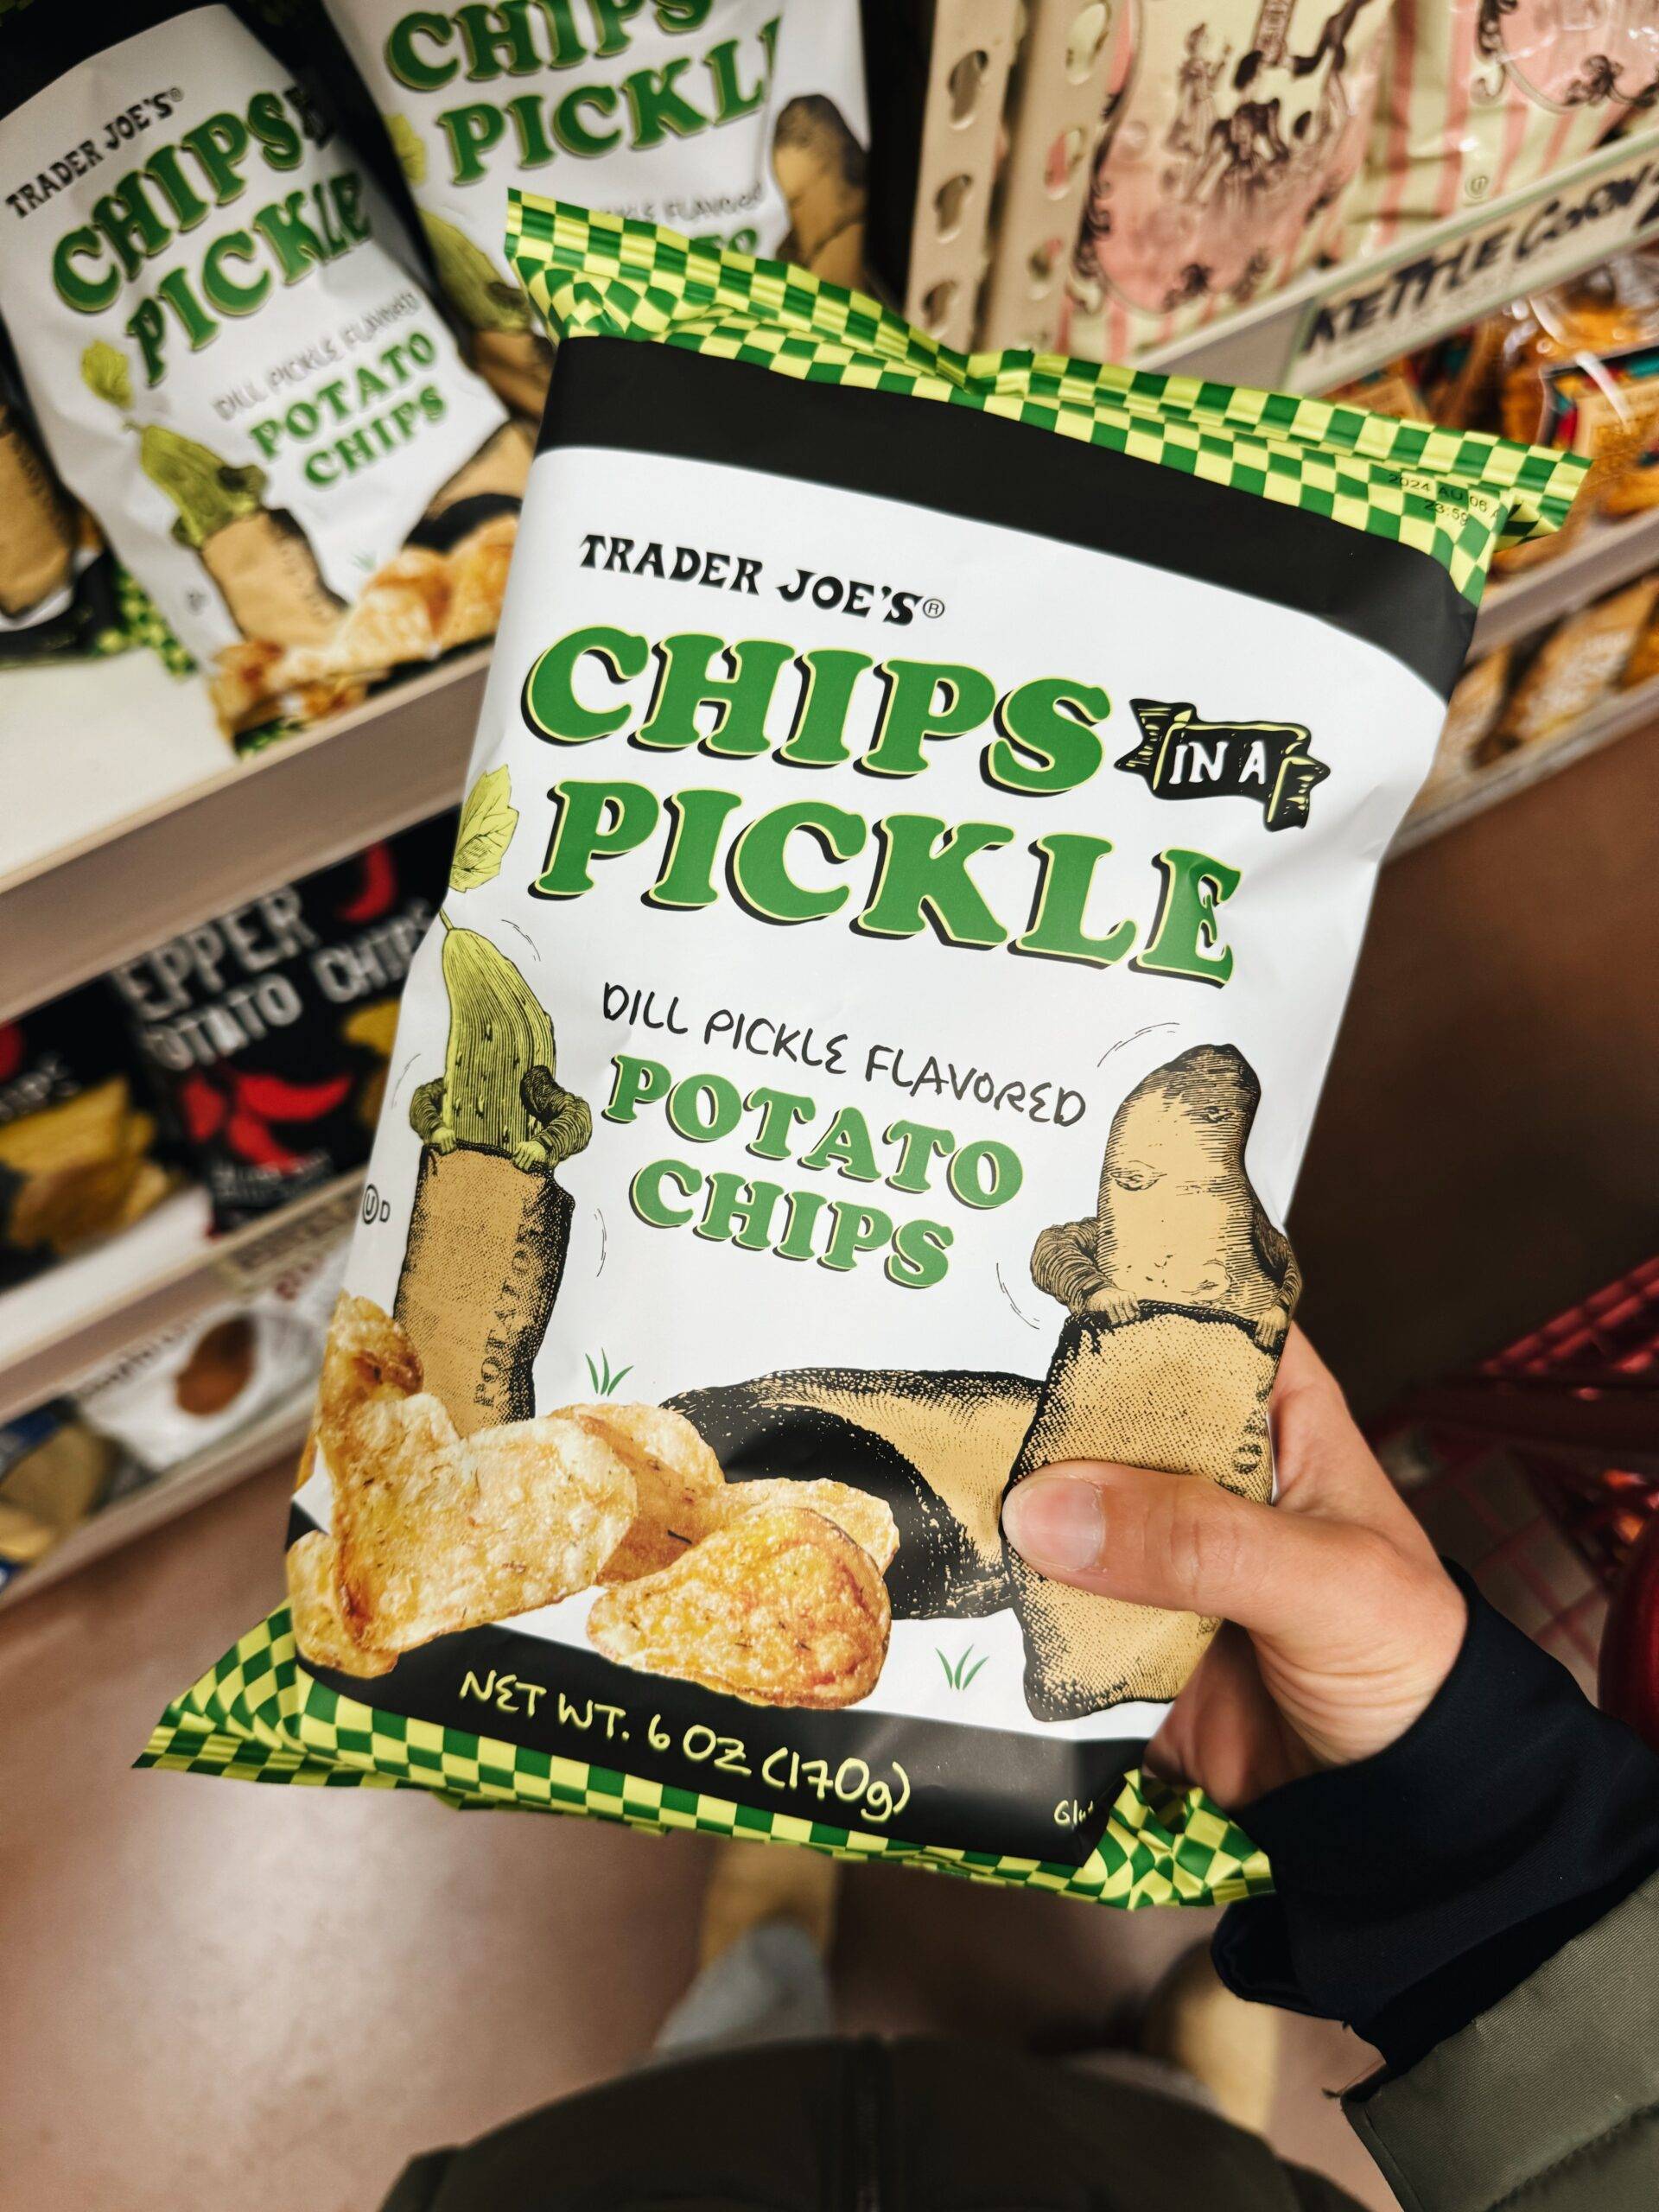 Chips in a pickle dill pickled chips bag.